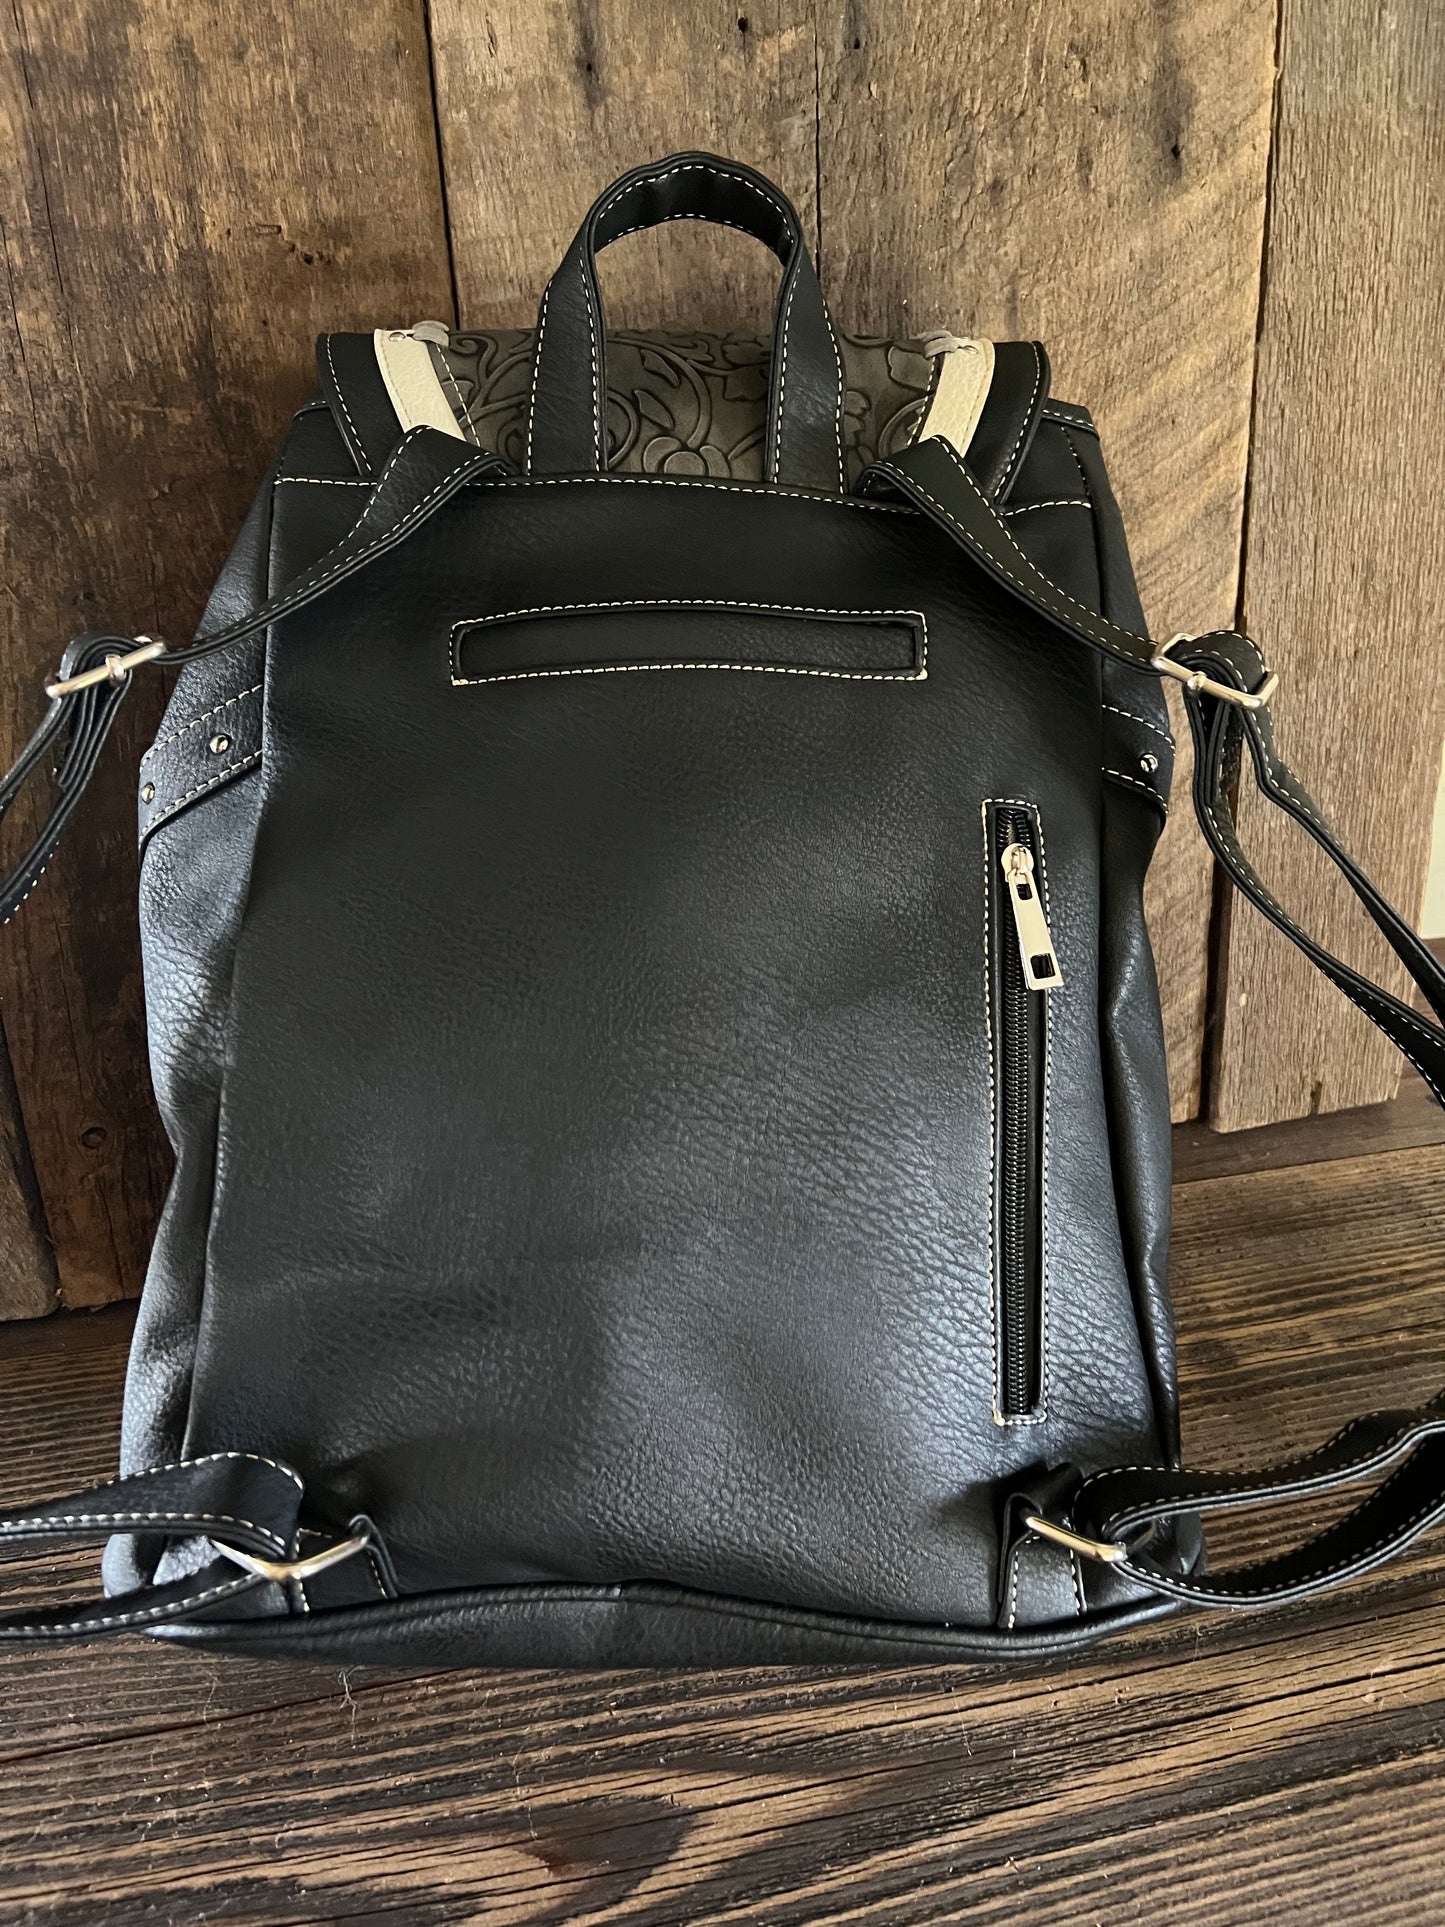 #300-BL Western Backpack with Concealed Carry pocket